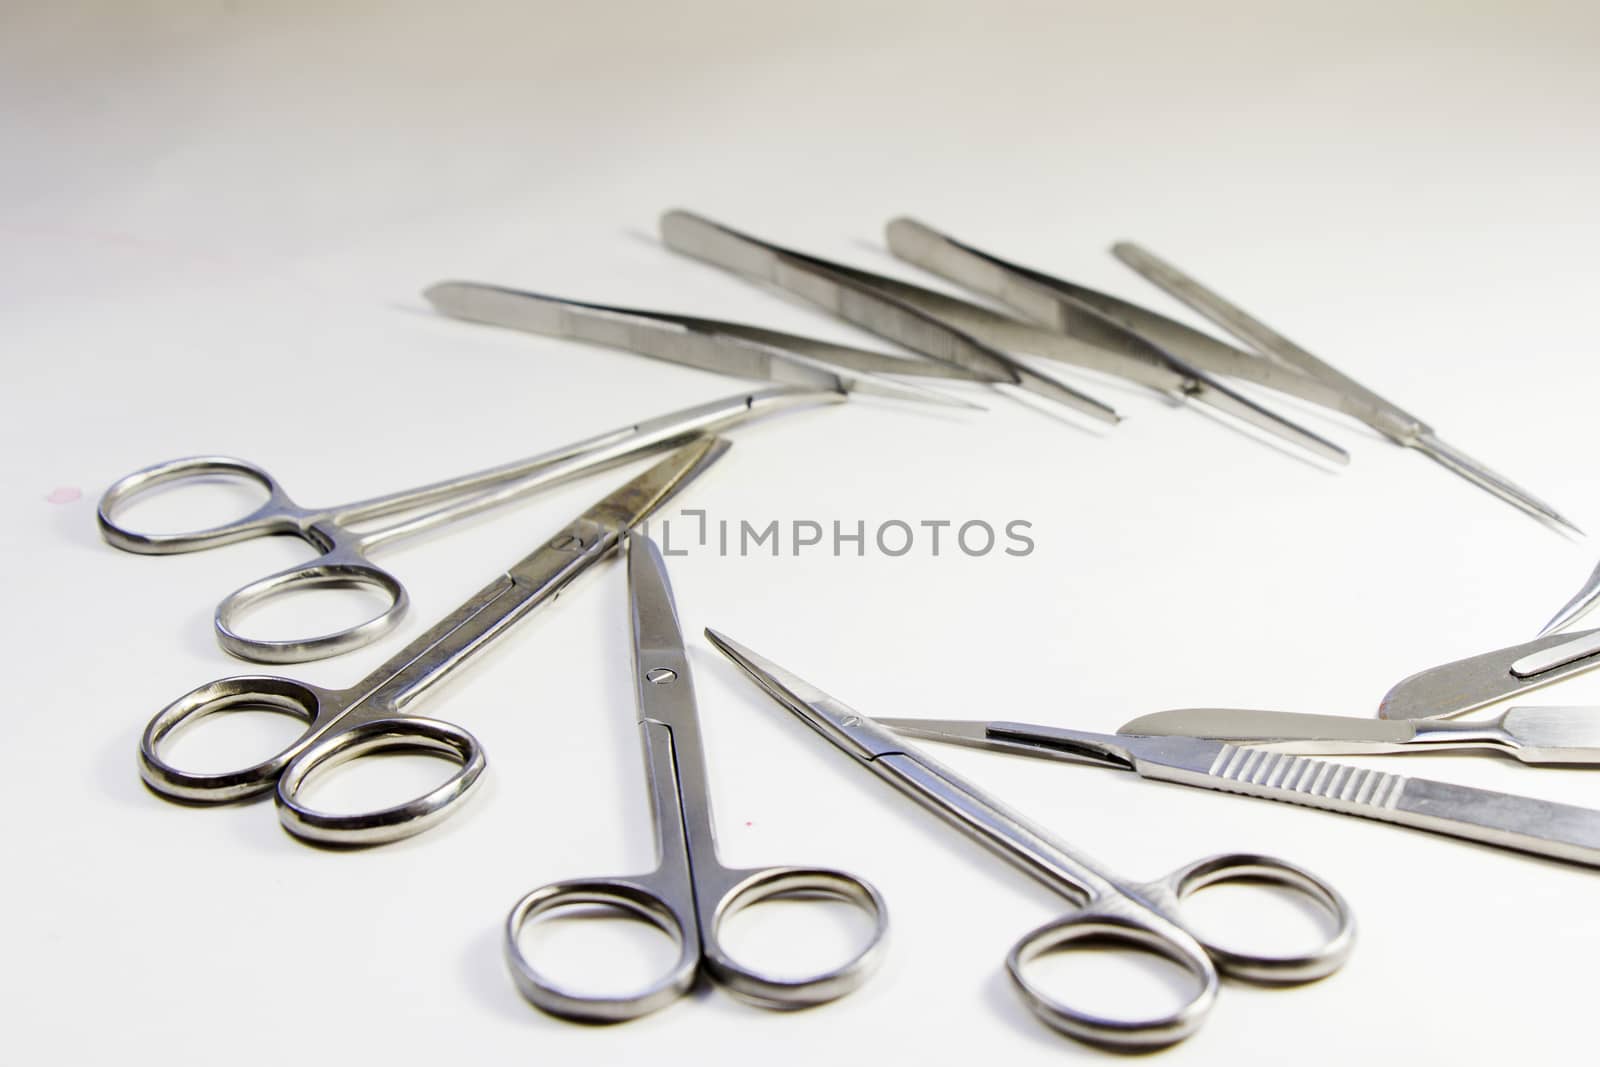 Dissection Kit - Premium Quality Stainless Steel Tools for Medical Students of Anatomy, Biology, Veterinary, Marine Biology with Scalpel Blades Included for Dissecting Frogs. Surgery instruments.